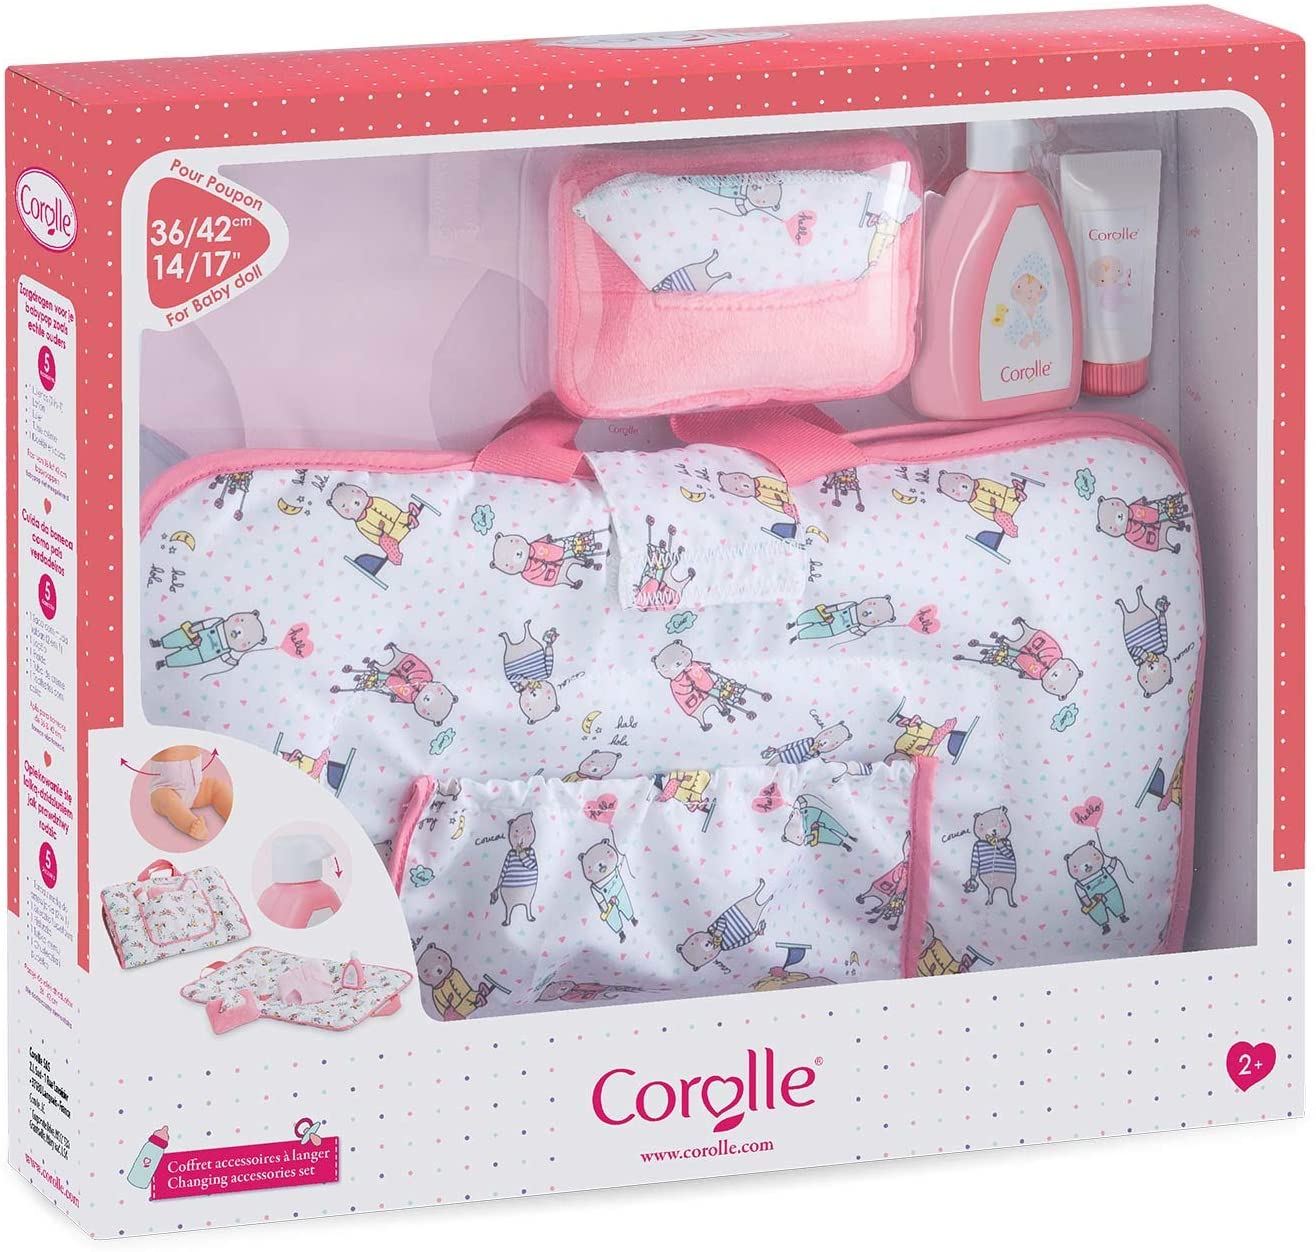 (OPEN BOX) Corolle - 2-in-1 Changing Accessories Set - 5Piece Play Set for 14" & 17"